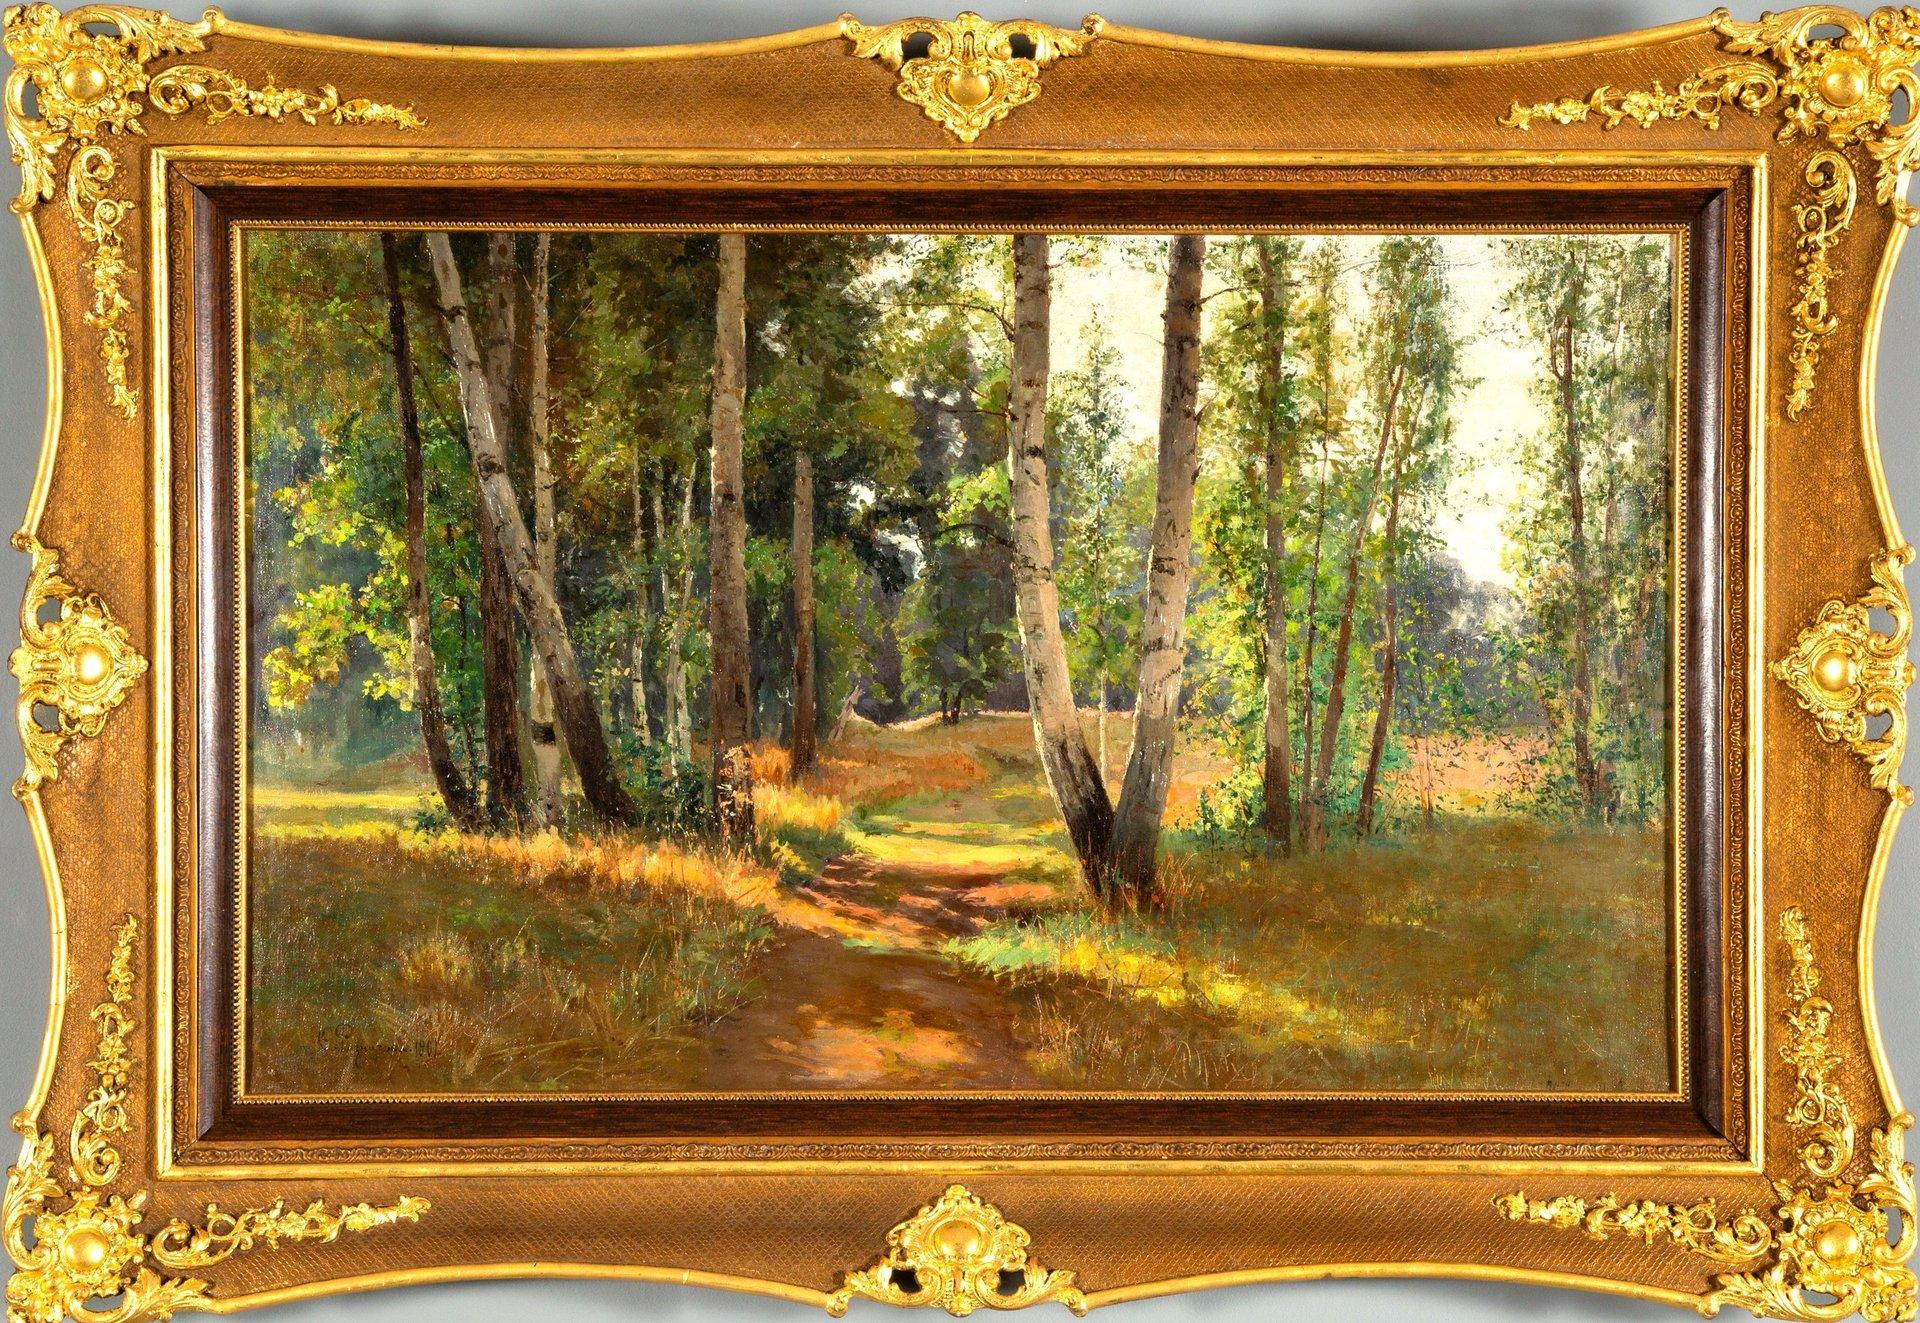 View of an undergrowth, 1901
Dimensions: 49 x 80 cm (unframed)
Oil on canvas
Signed lower left and dated


Fedor Petrovich Riznichenko - Russian and Ukrainian landscape painter, was a member of the St. Petersburg Society of Artists and a regular